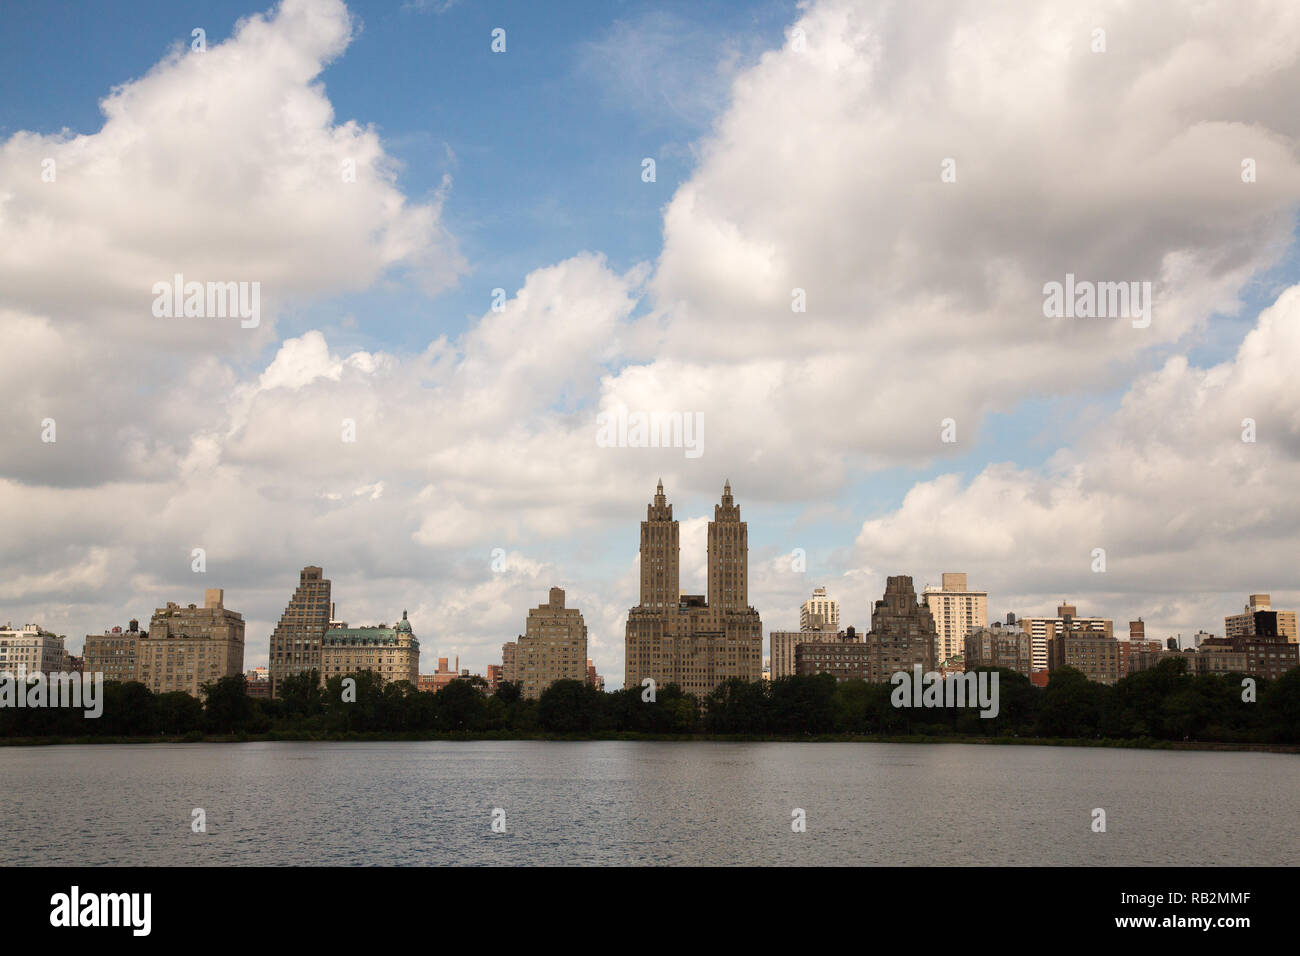 West side view across the Jacqueline Kennedy Onassis reservoir in Central Park, New York City. Stock Photo